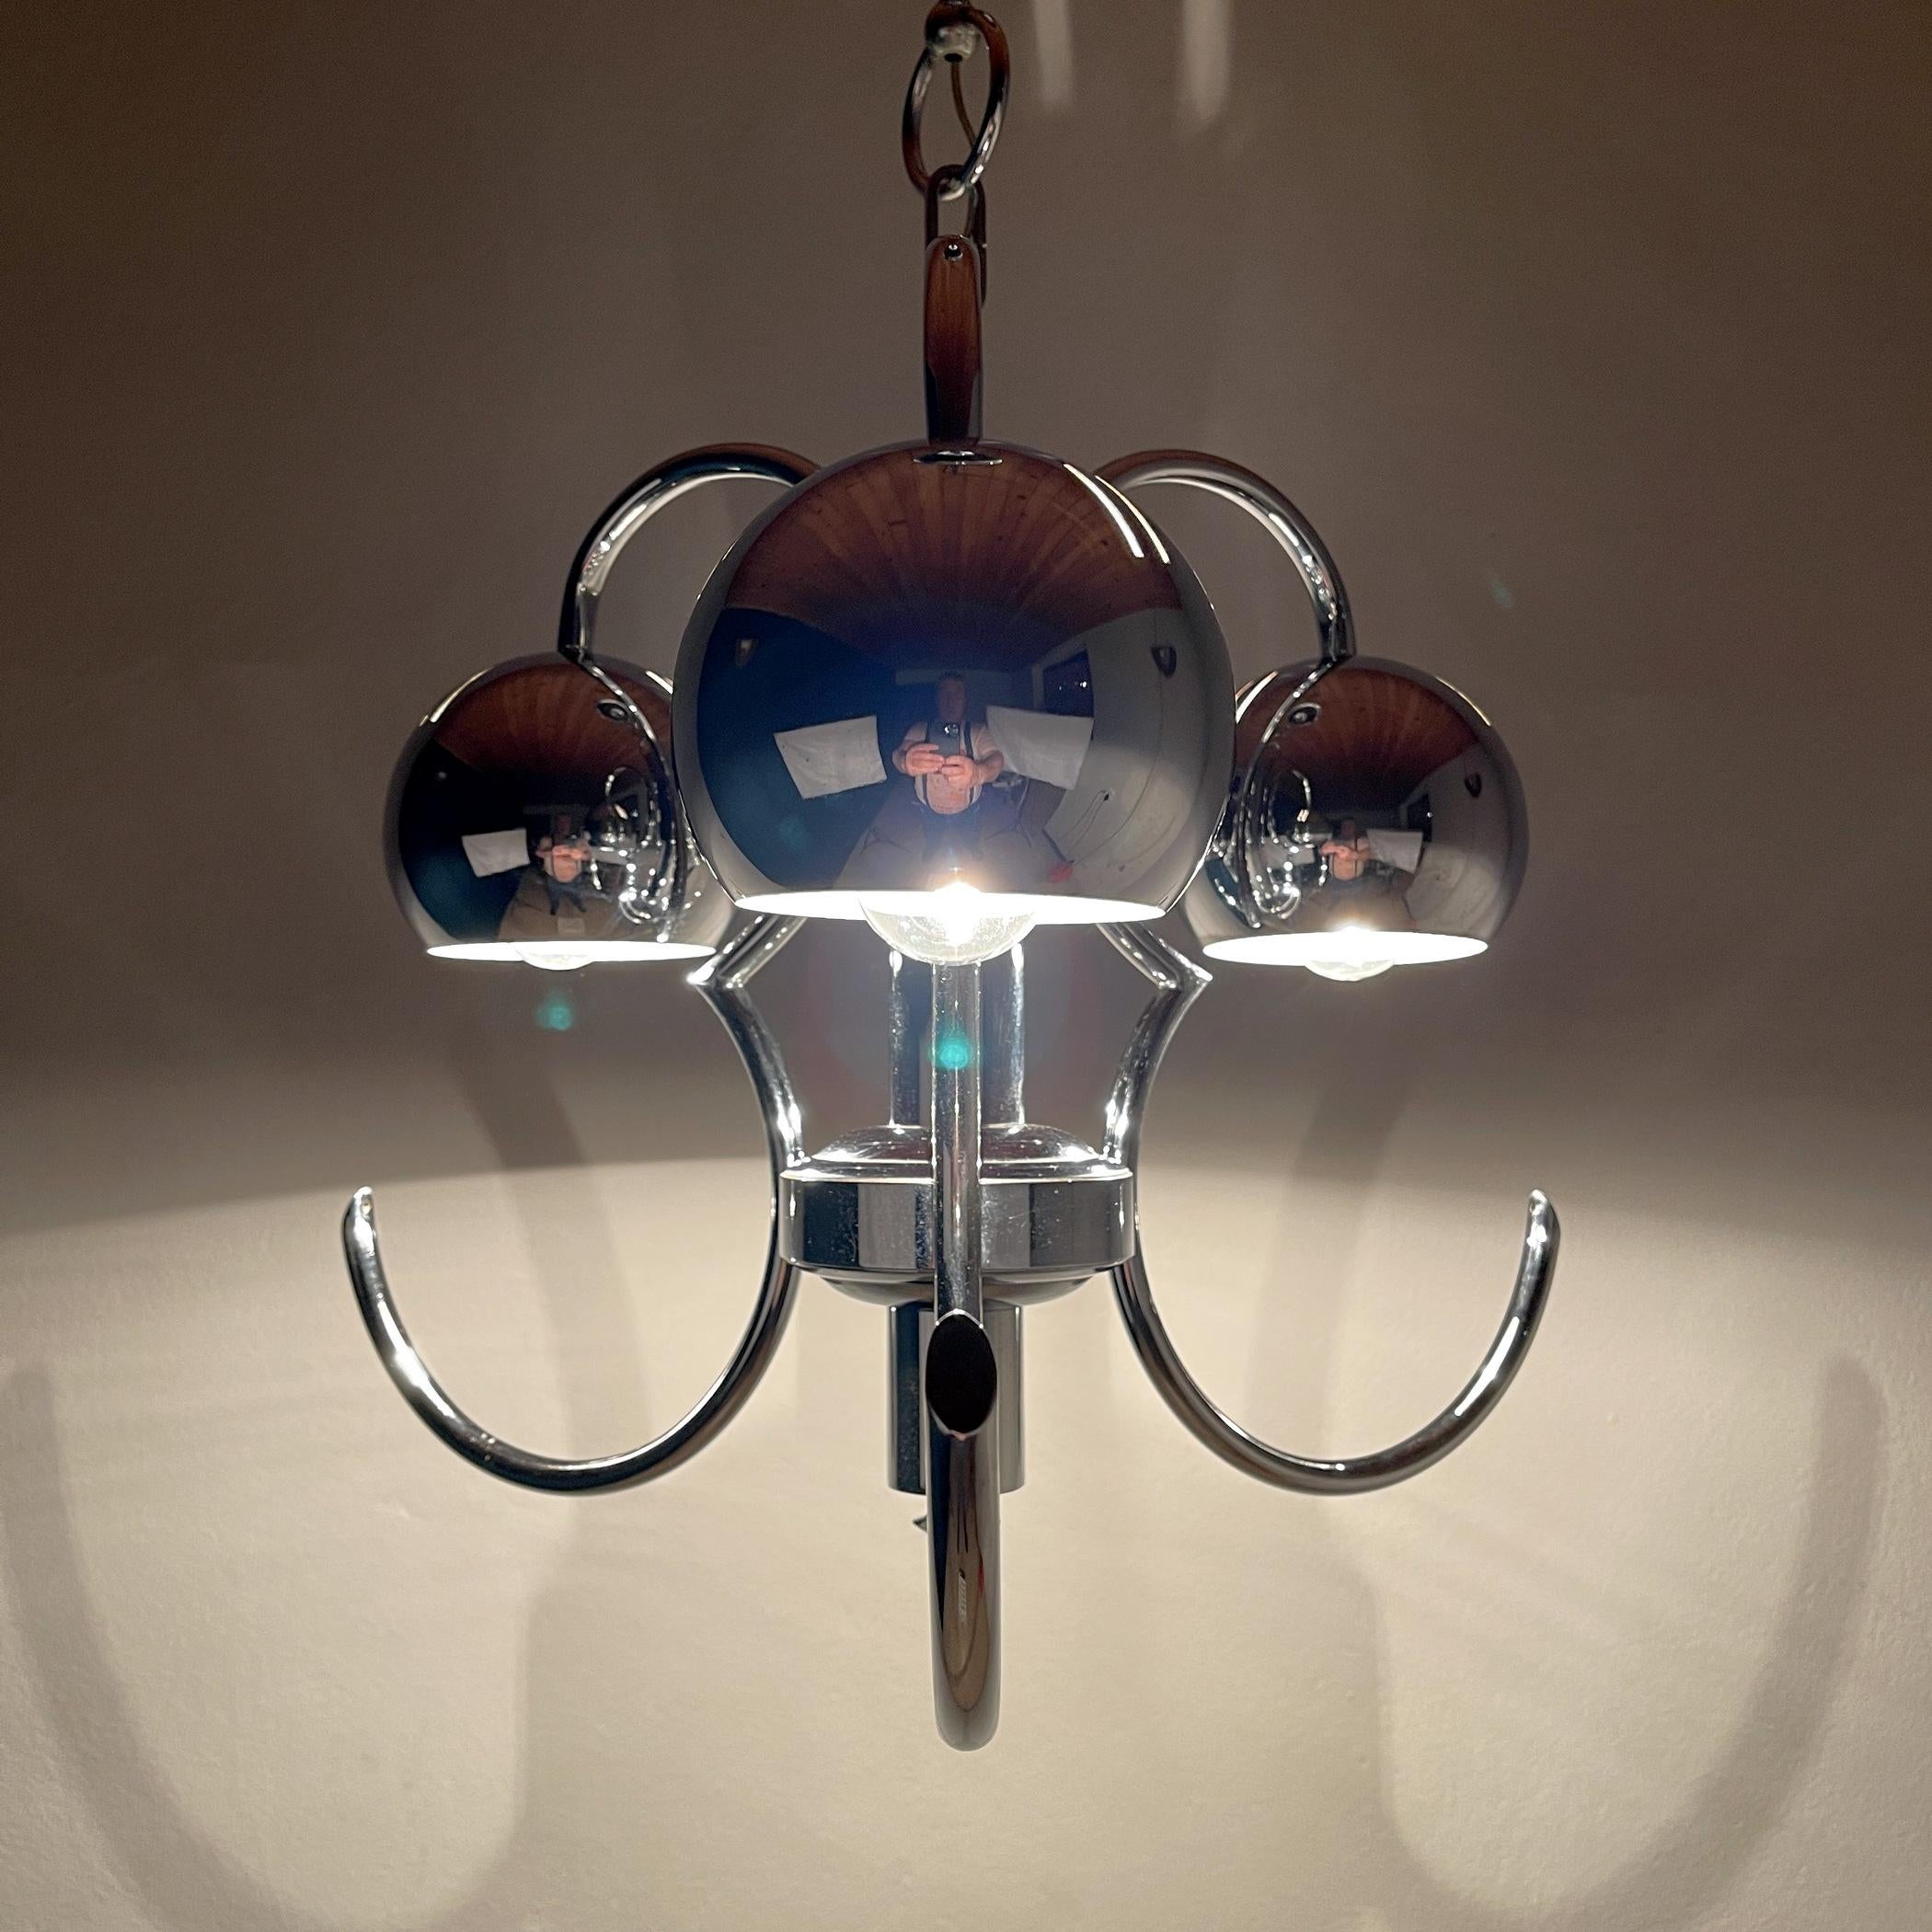 Mid-century eyeball silver pendant lamp made in Italy in the 1970s.
Very good vintage condition. Chrome is in excellent condition. Height with cable 60 cm. Requires three E27 bulbs.
The mid-century lamp is perfect for Italian modern, retro and